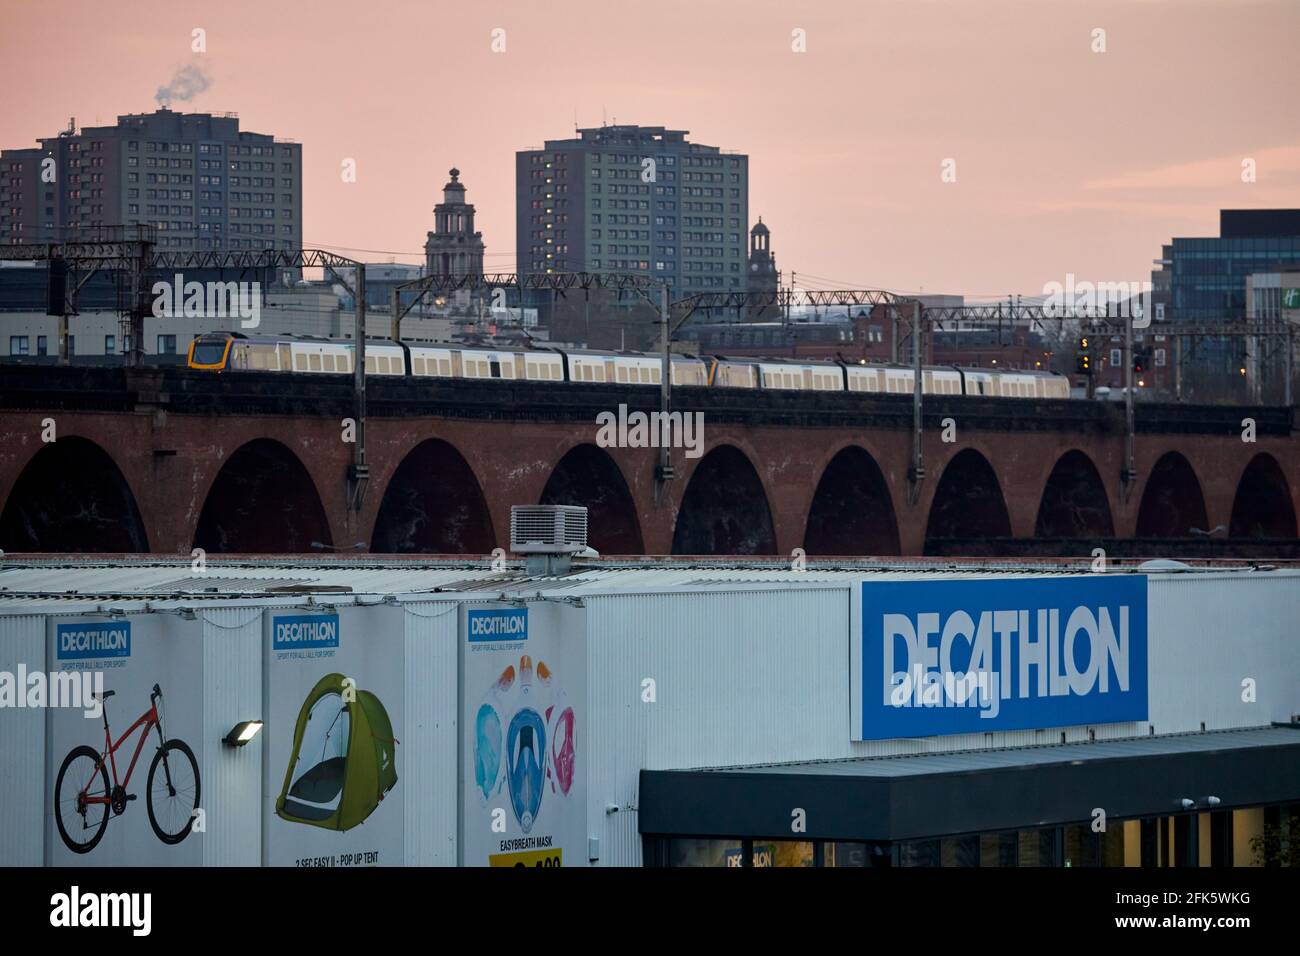 Built by CAF British Rail Class 331 operated by Northern Trains on Stockport Viaduct, greater Manchester Stock Photo